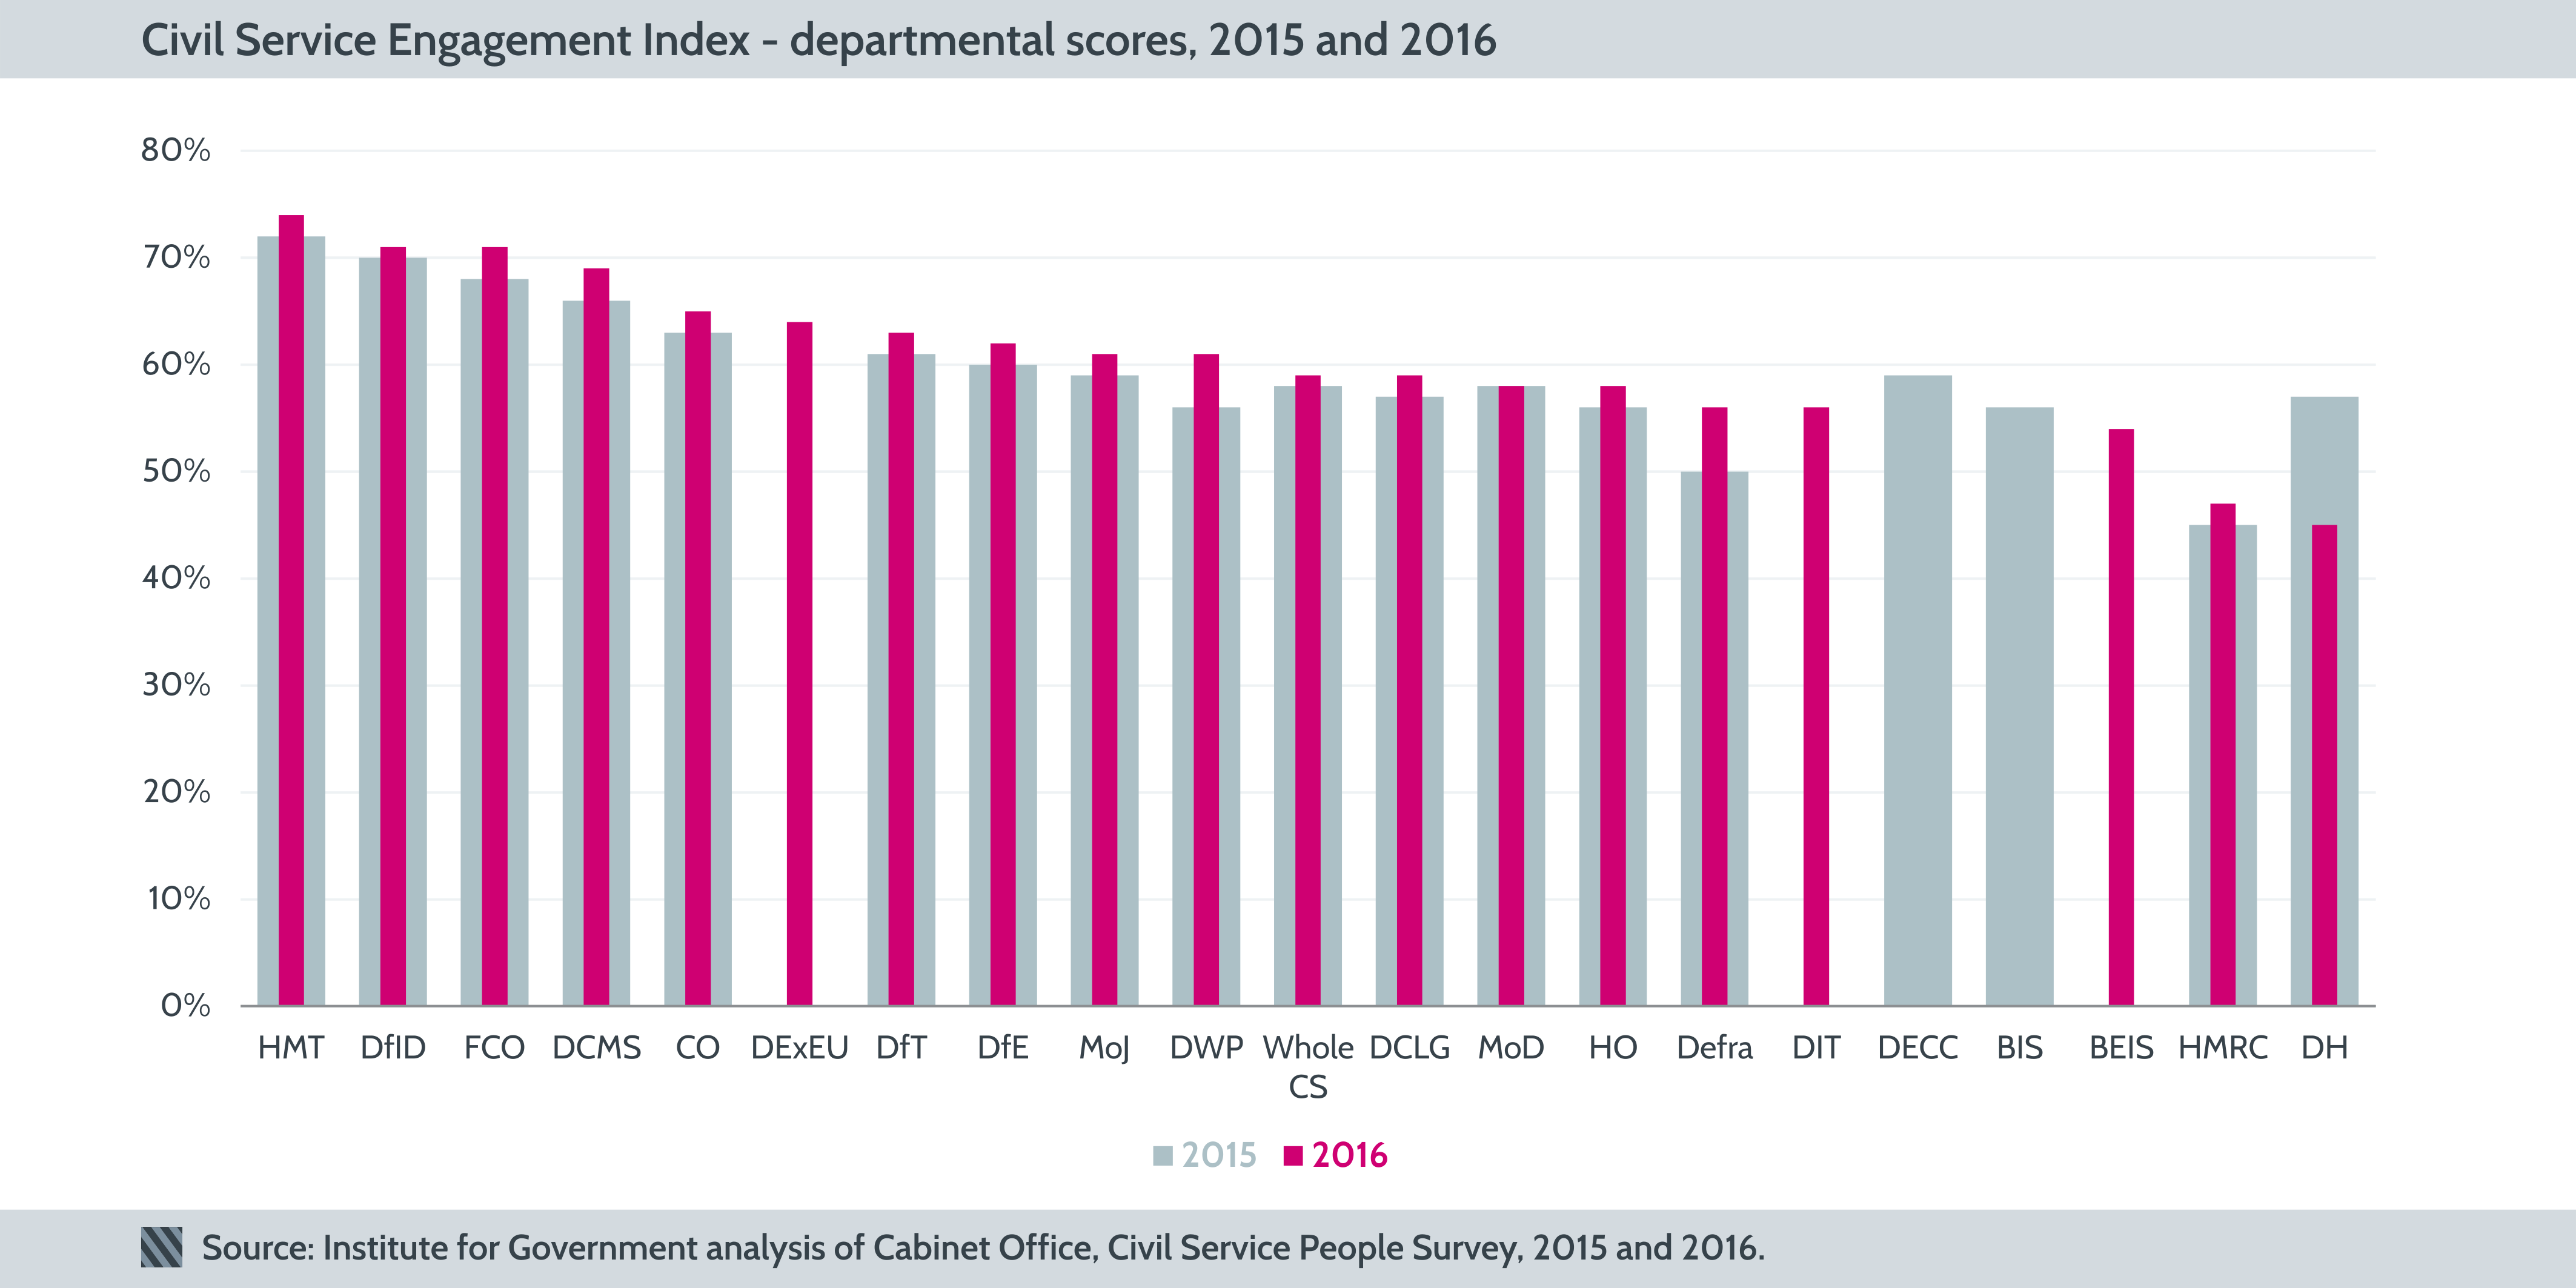 Engagement Index by department, 2015 and 2016